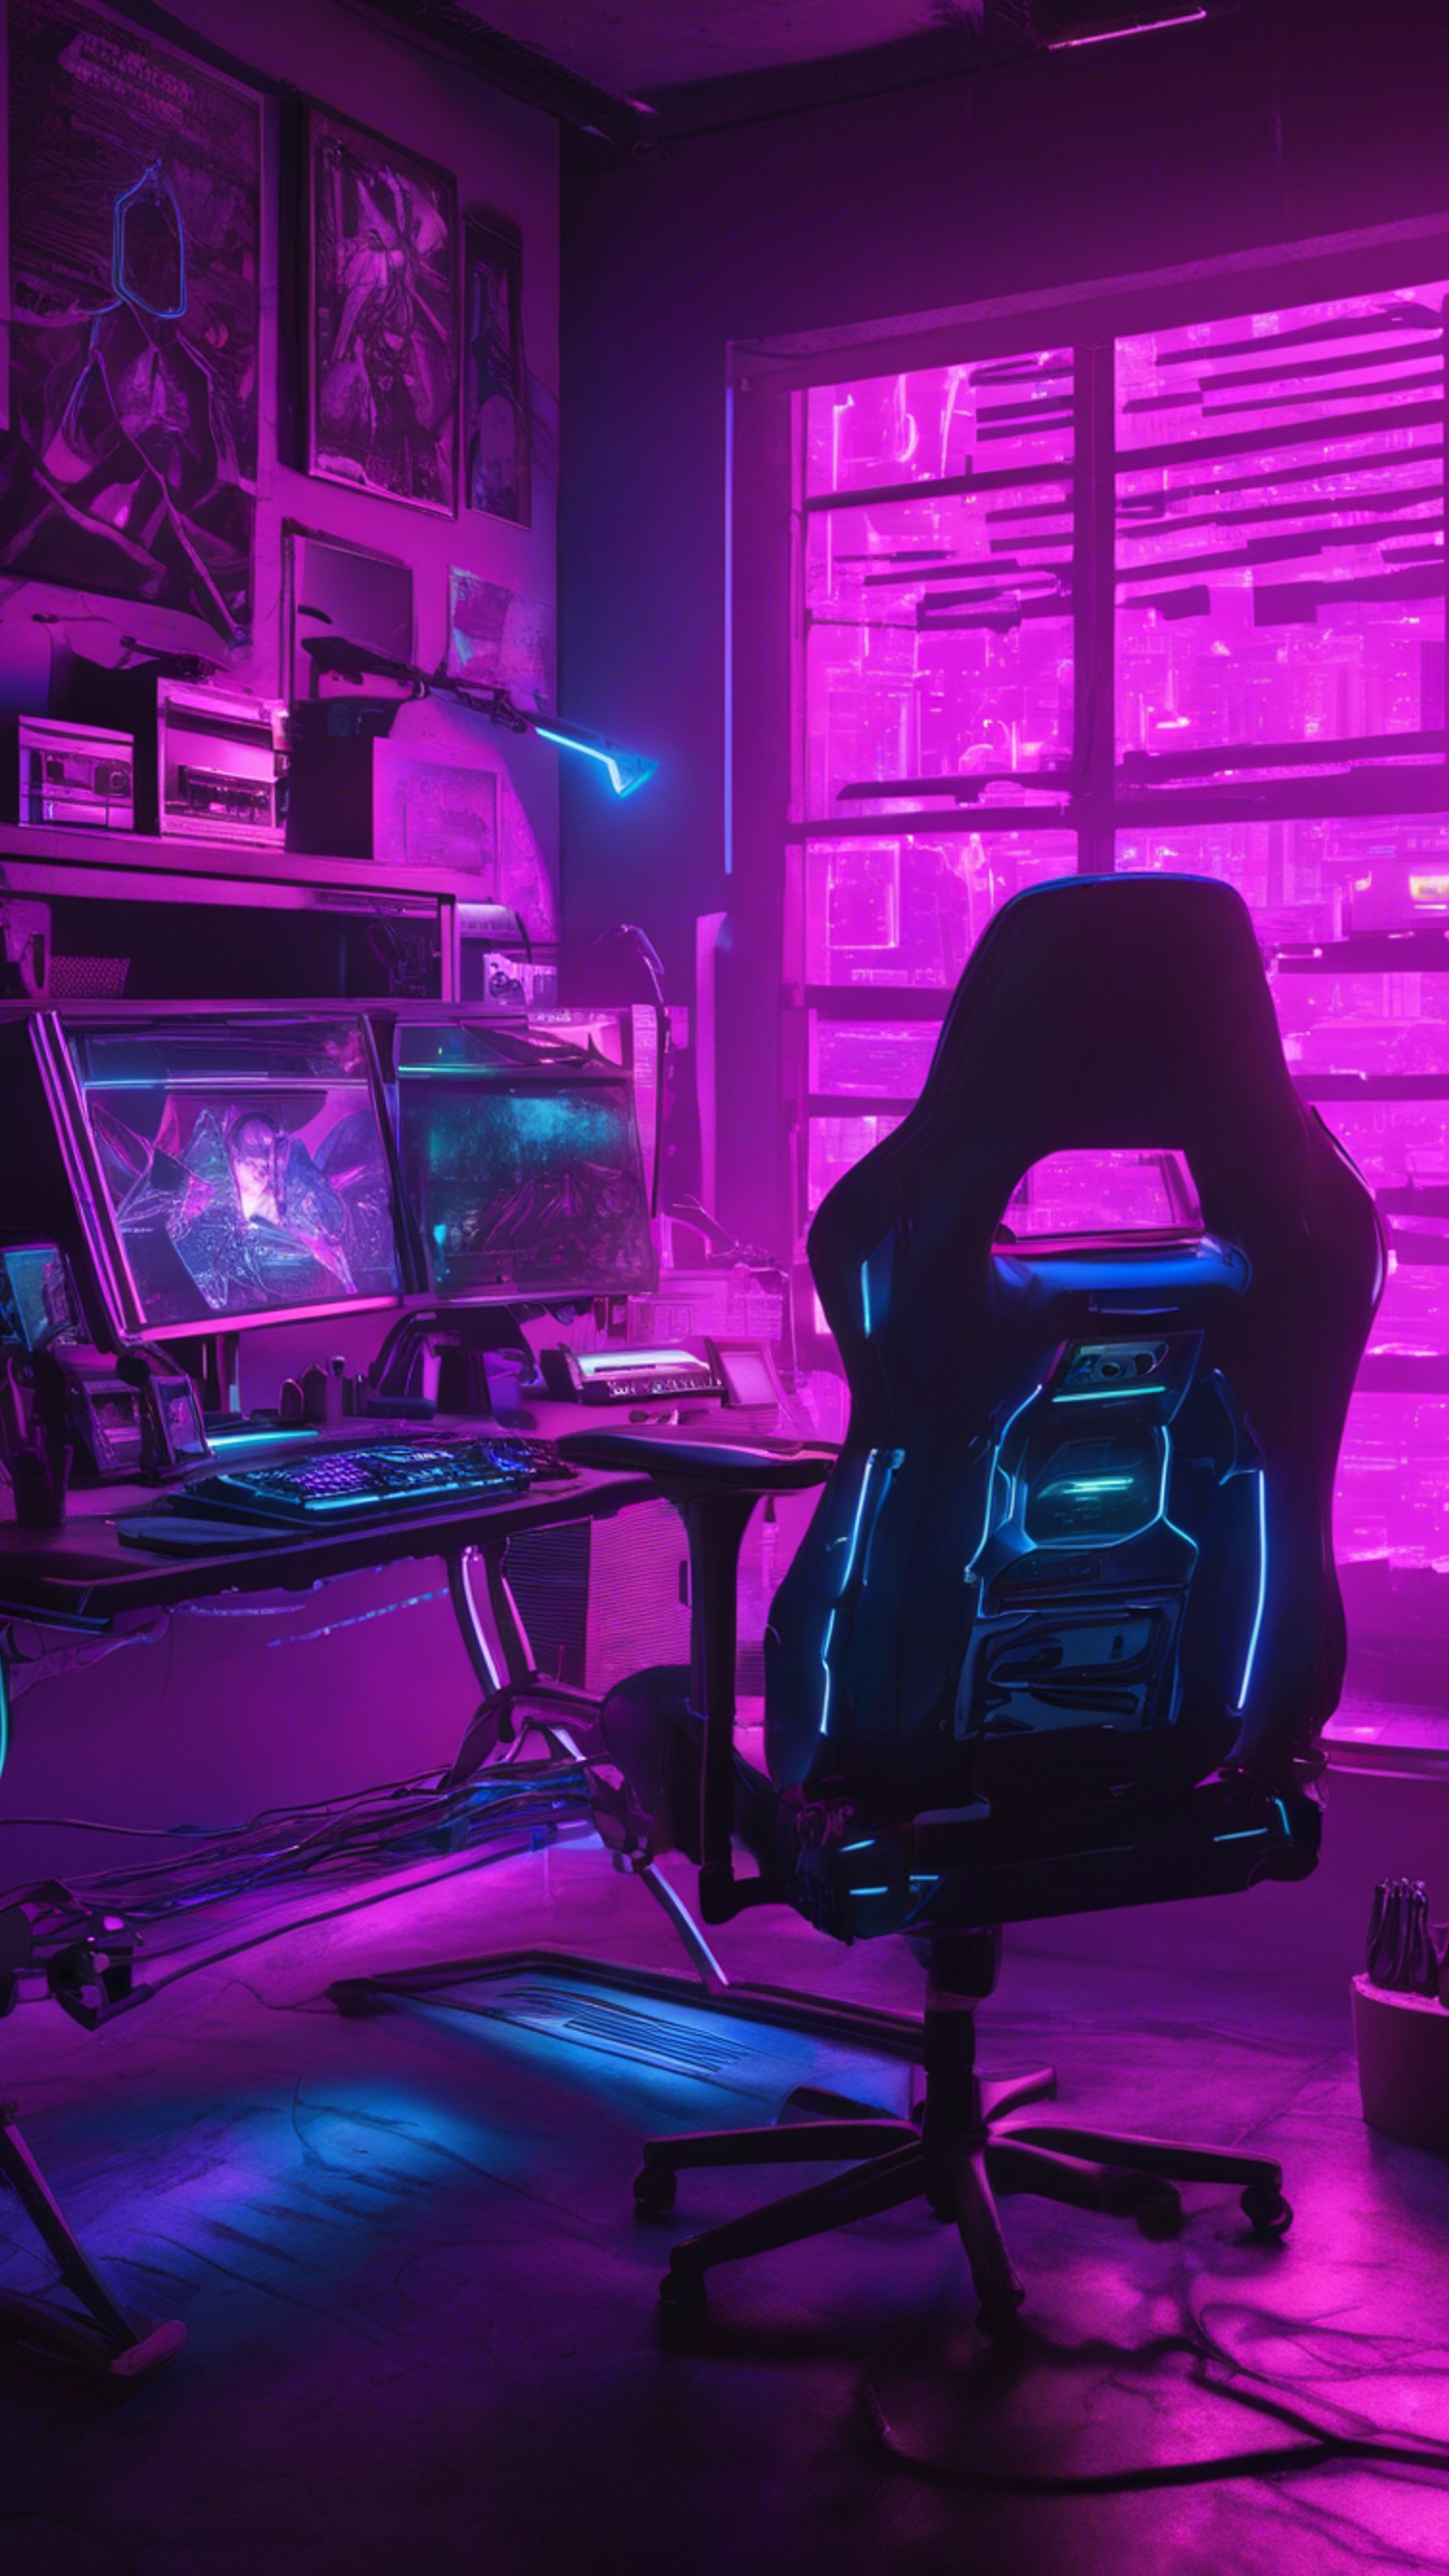 A modern gaming room lit with neon purple lights, showing an advanced gaming set up on a sleek desk. Papel de parede[eb087c215e784f138c4c]